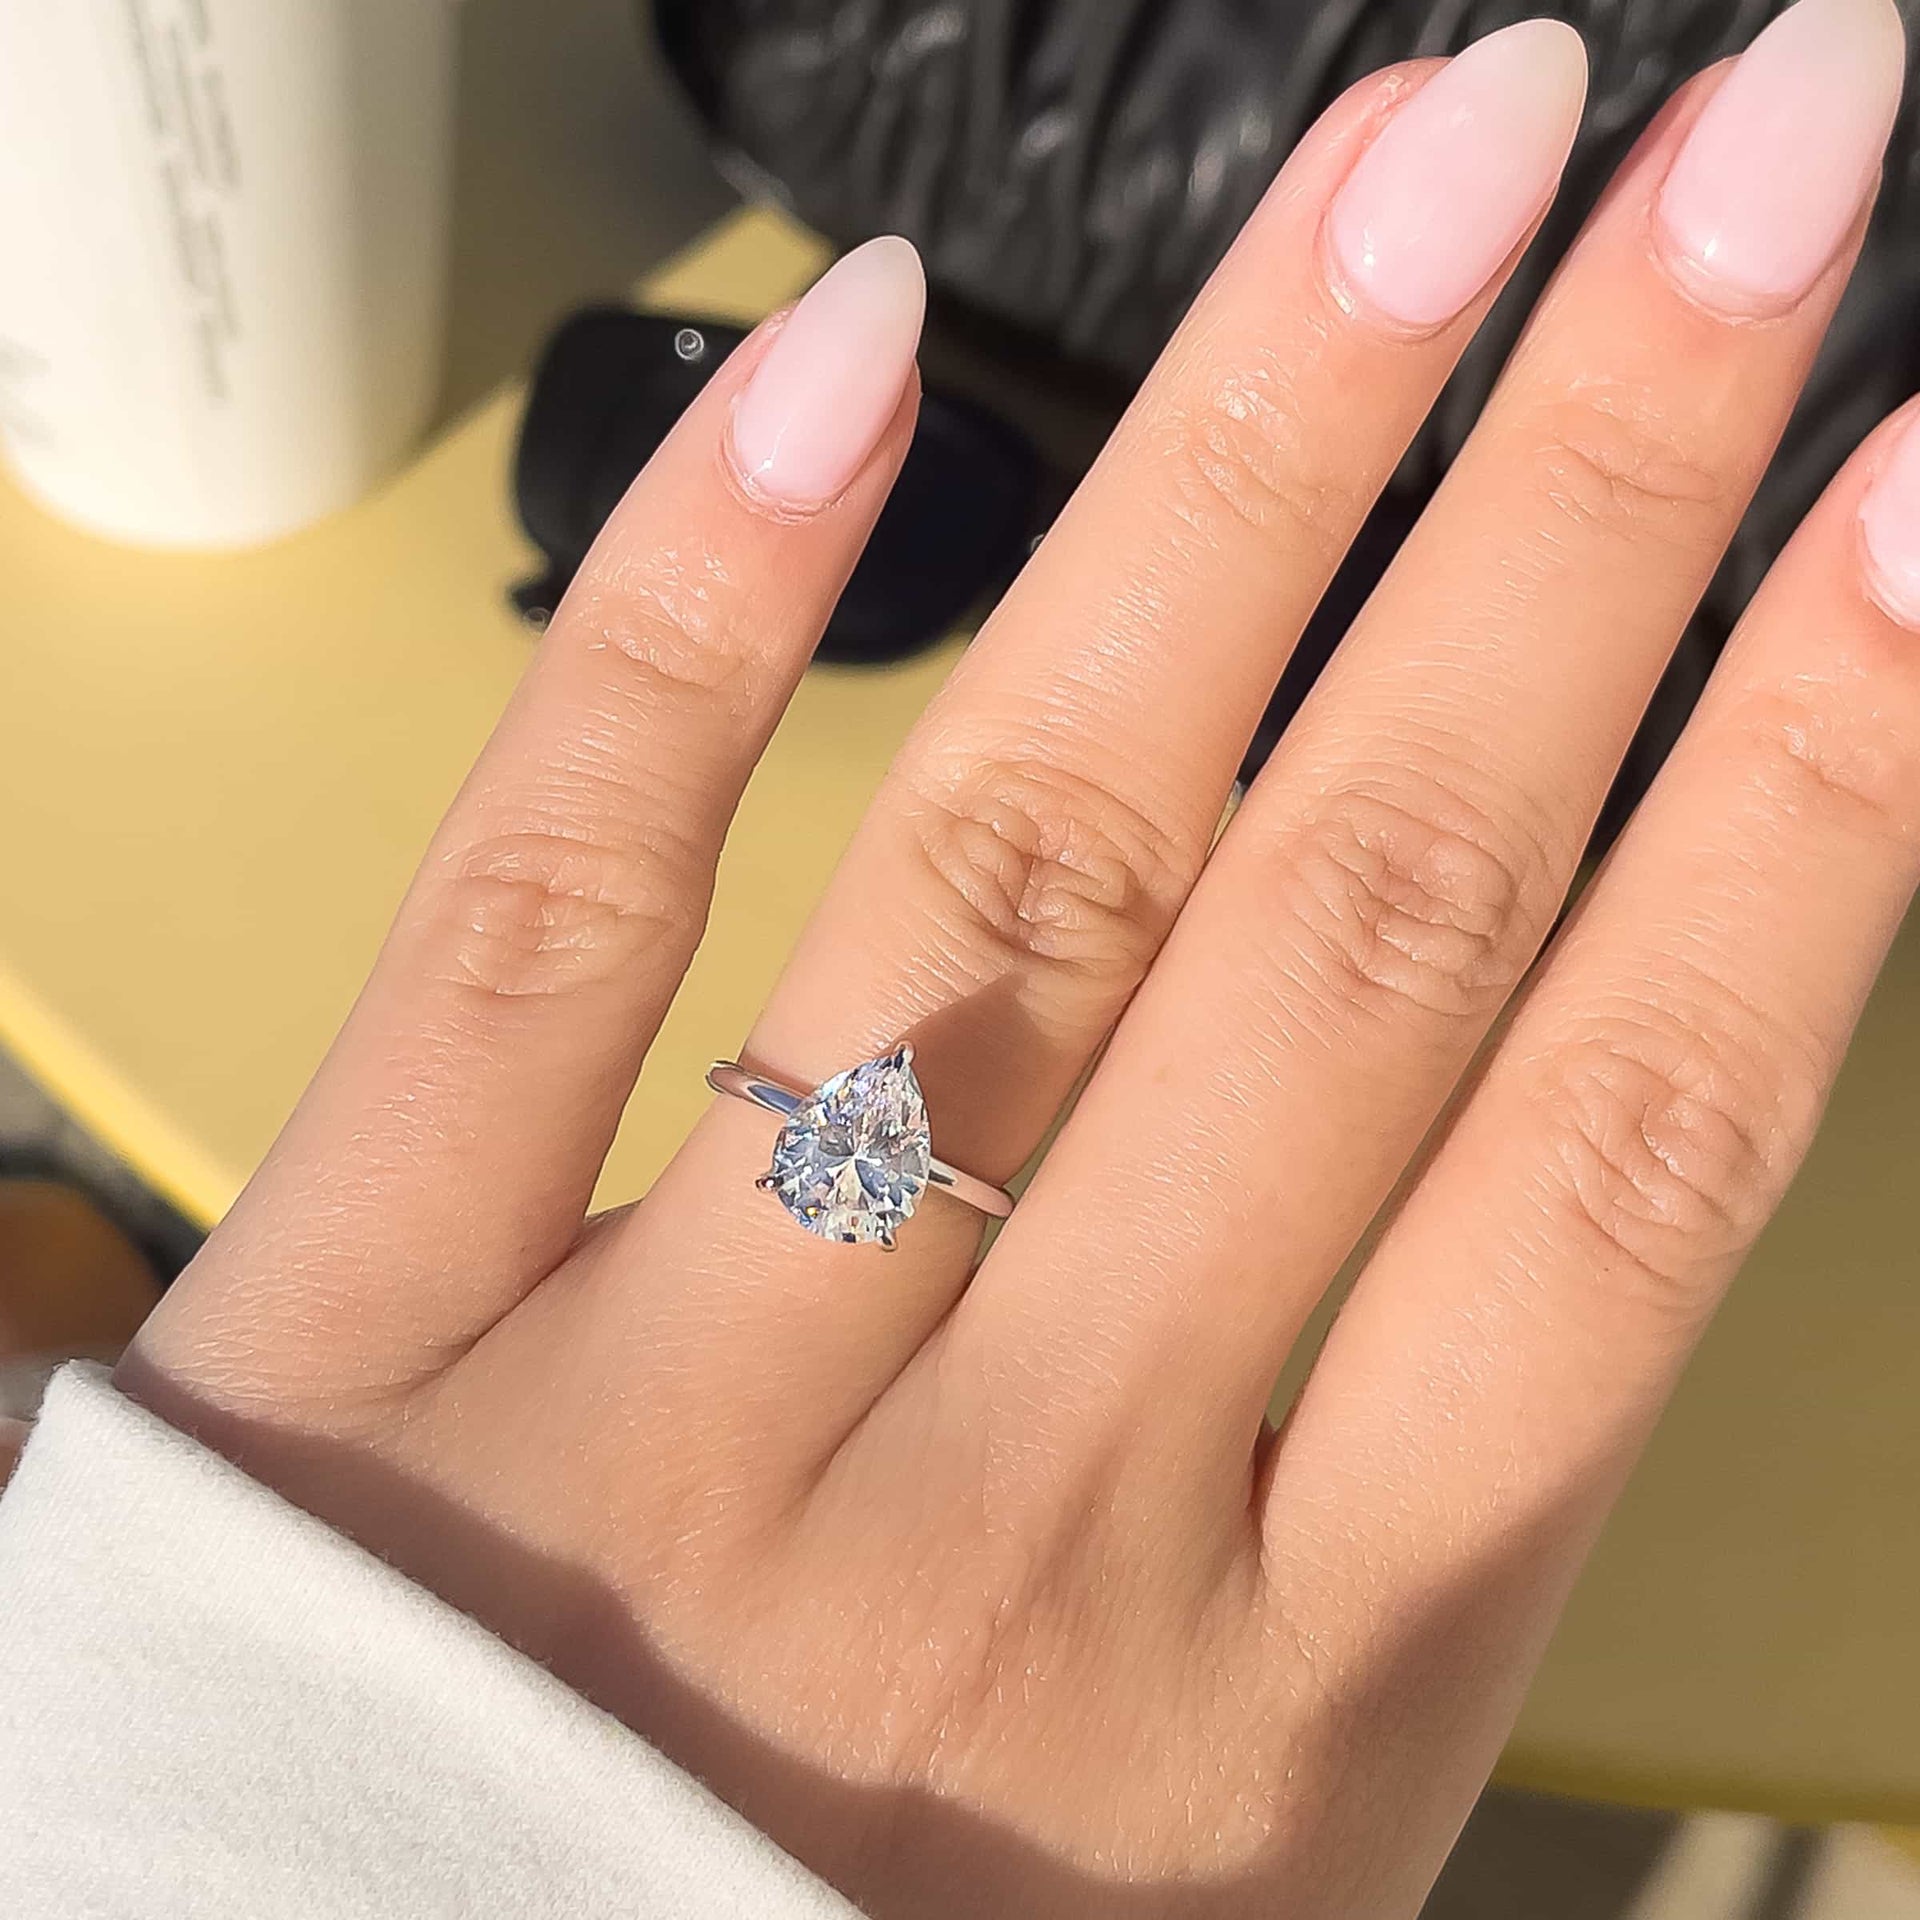 silver pear cut engagement ring on woman's hand